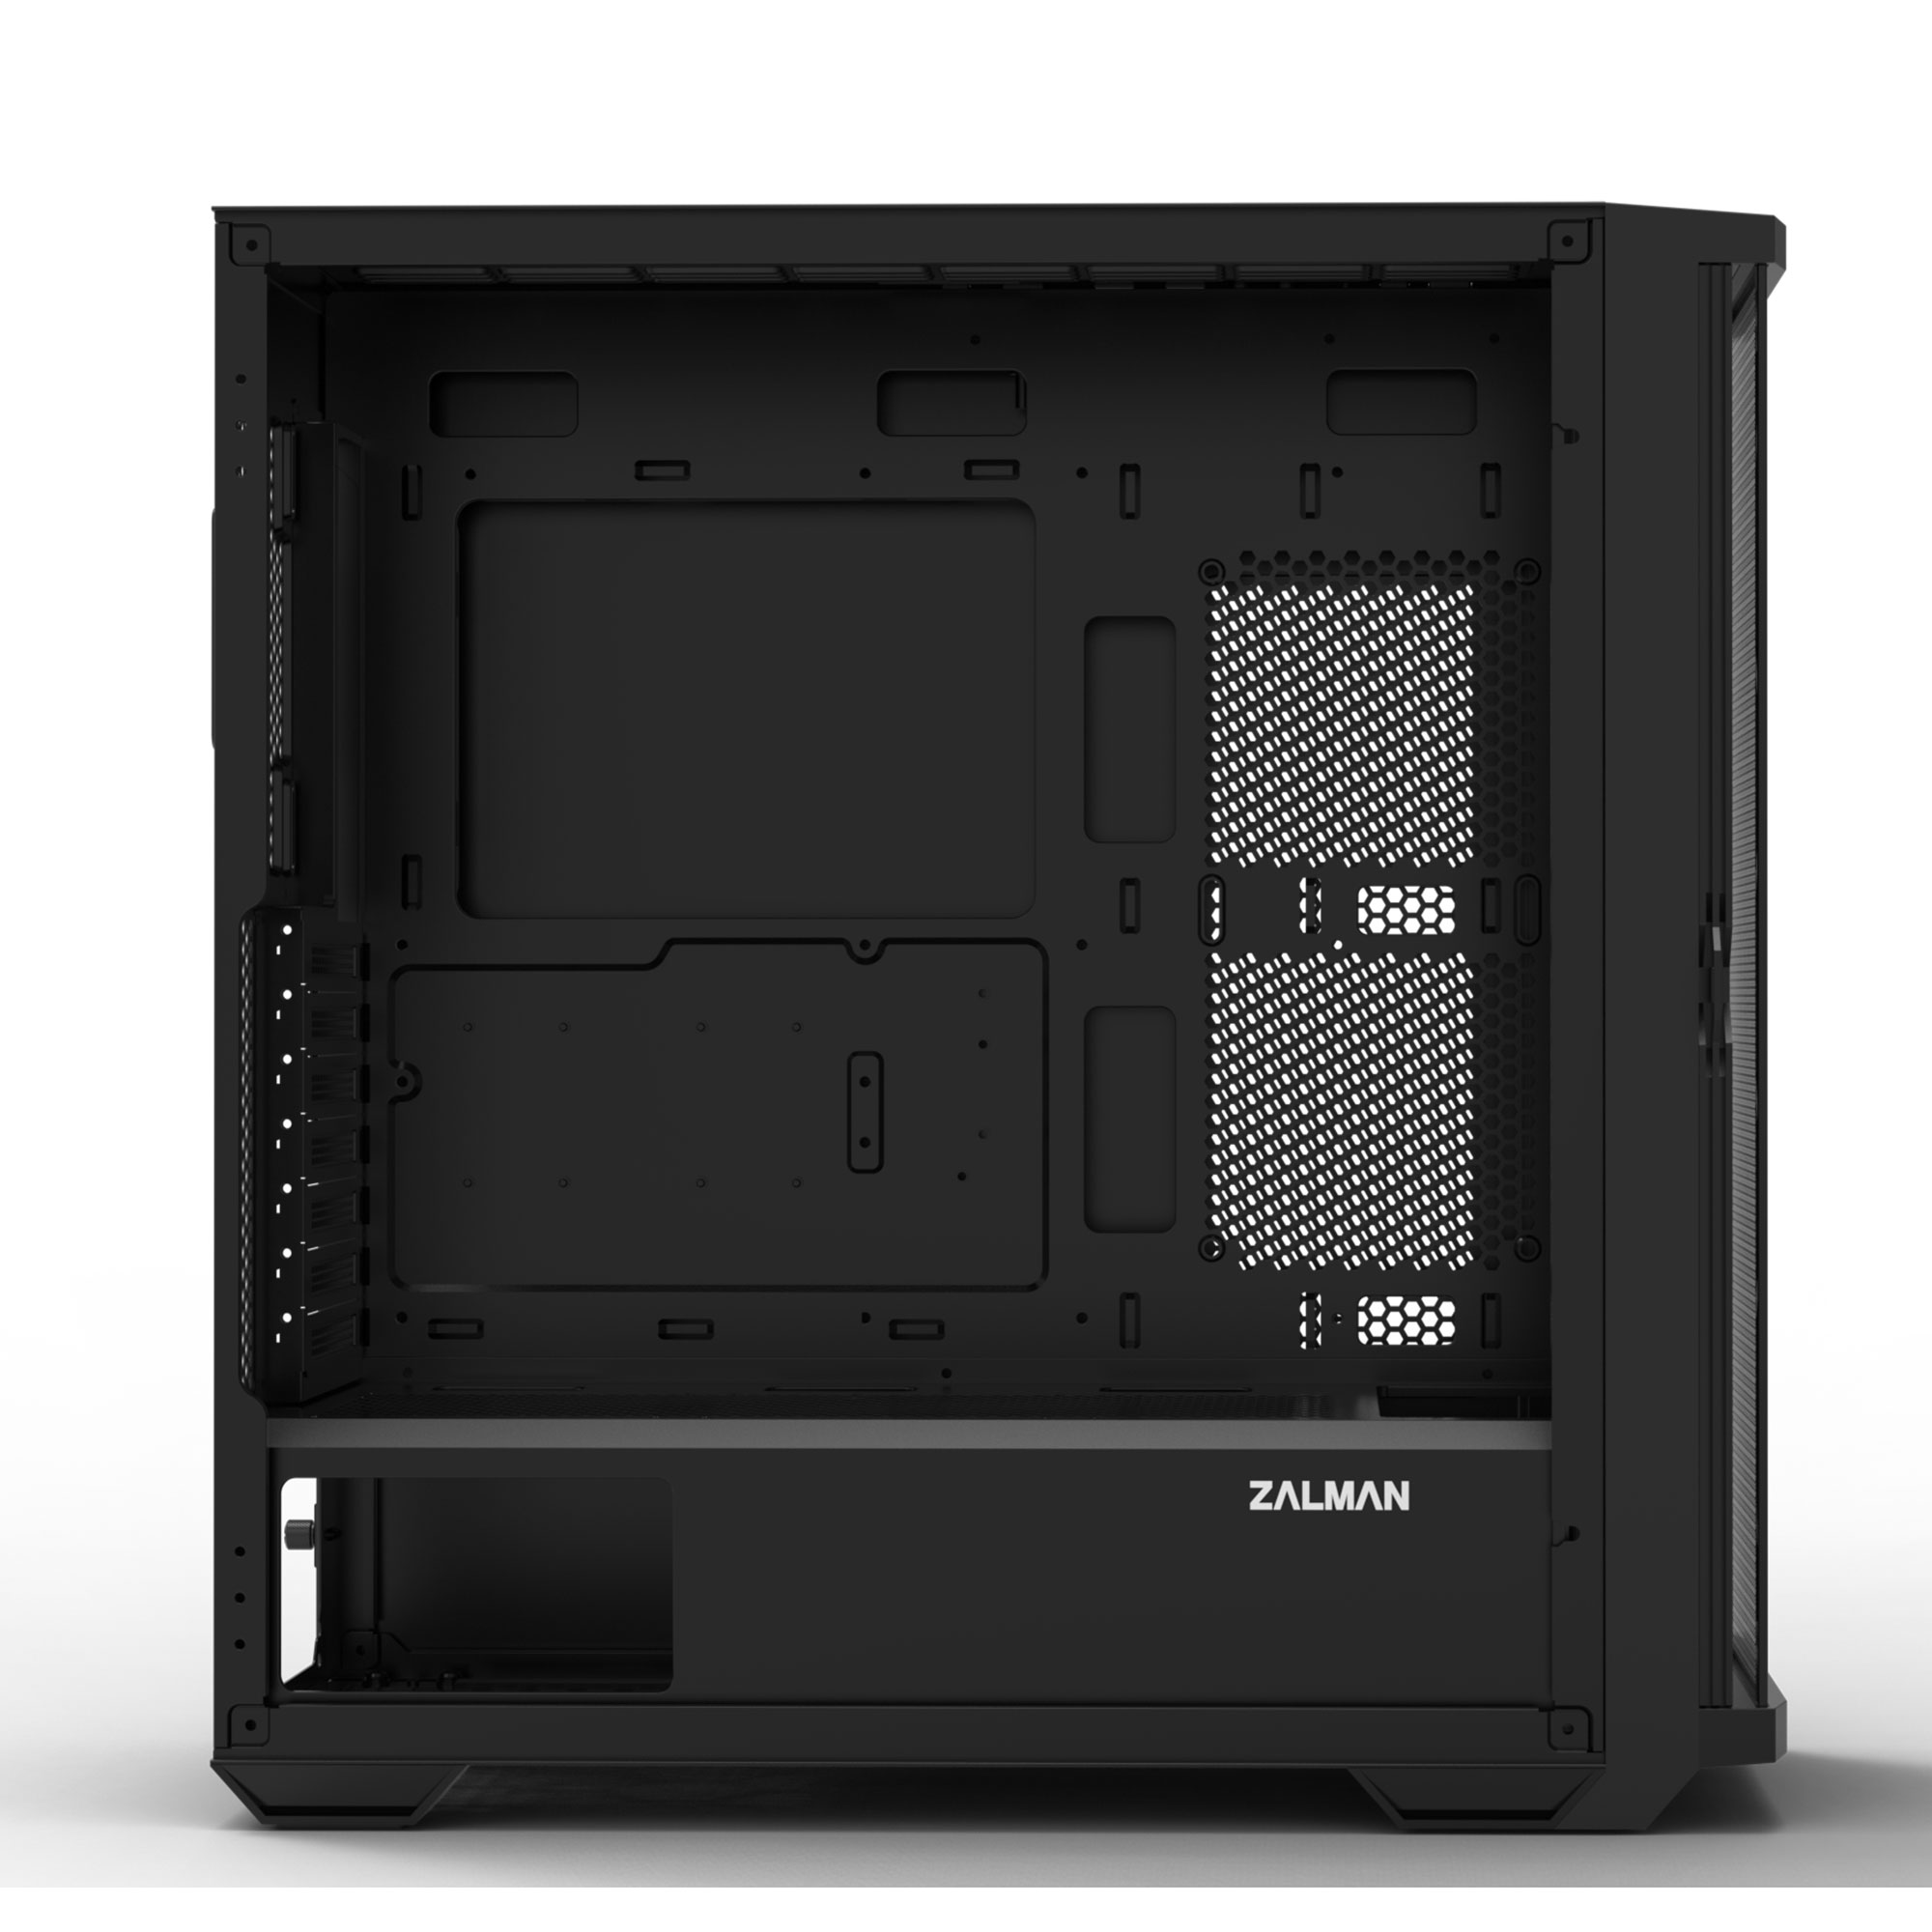 Zalman Z10 - ATX Mid-Tower Case/ Pre-installed fan: 3x 120mm(Front), 1x 120mm(Rear)/ T/G Side Panel, Mesh Front Panel/ Convenient Sliding Dust Filter at Front/ 1x USB Type-C applied/ GPU Support Brace Included/ Dimension : 481 x 220 x 488 (H)mm